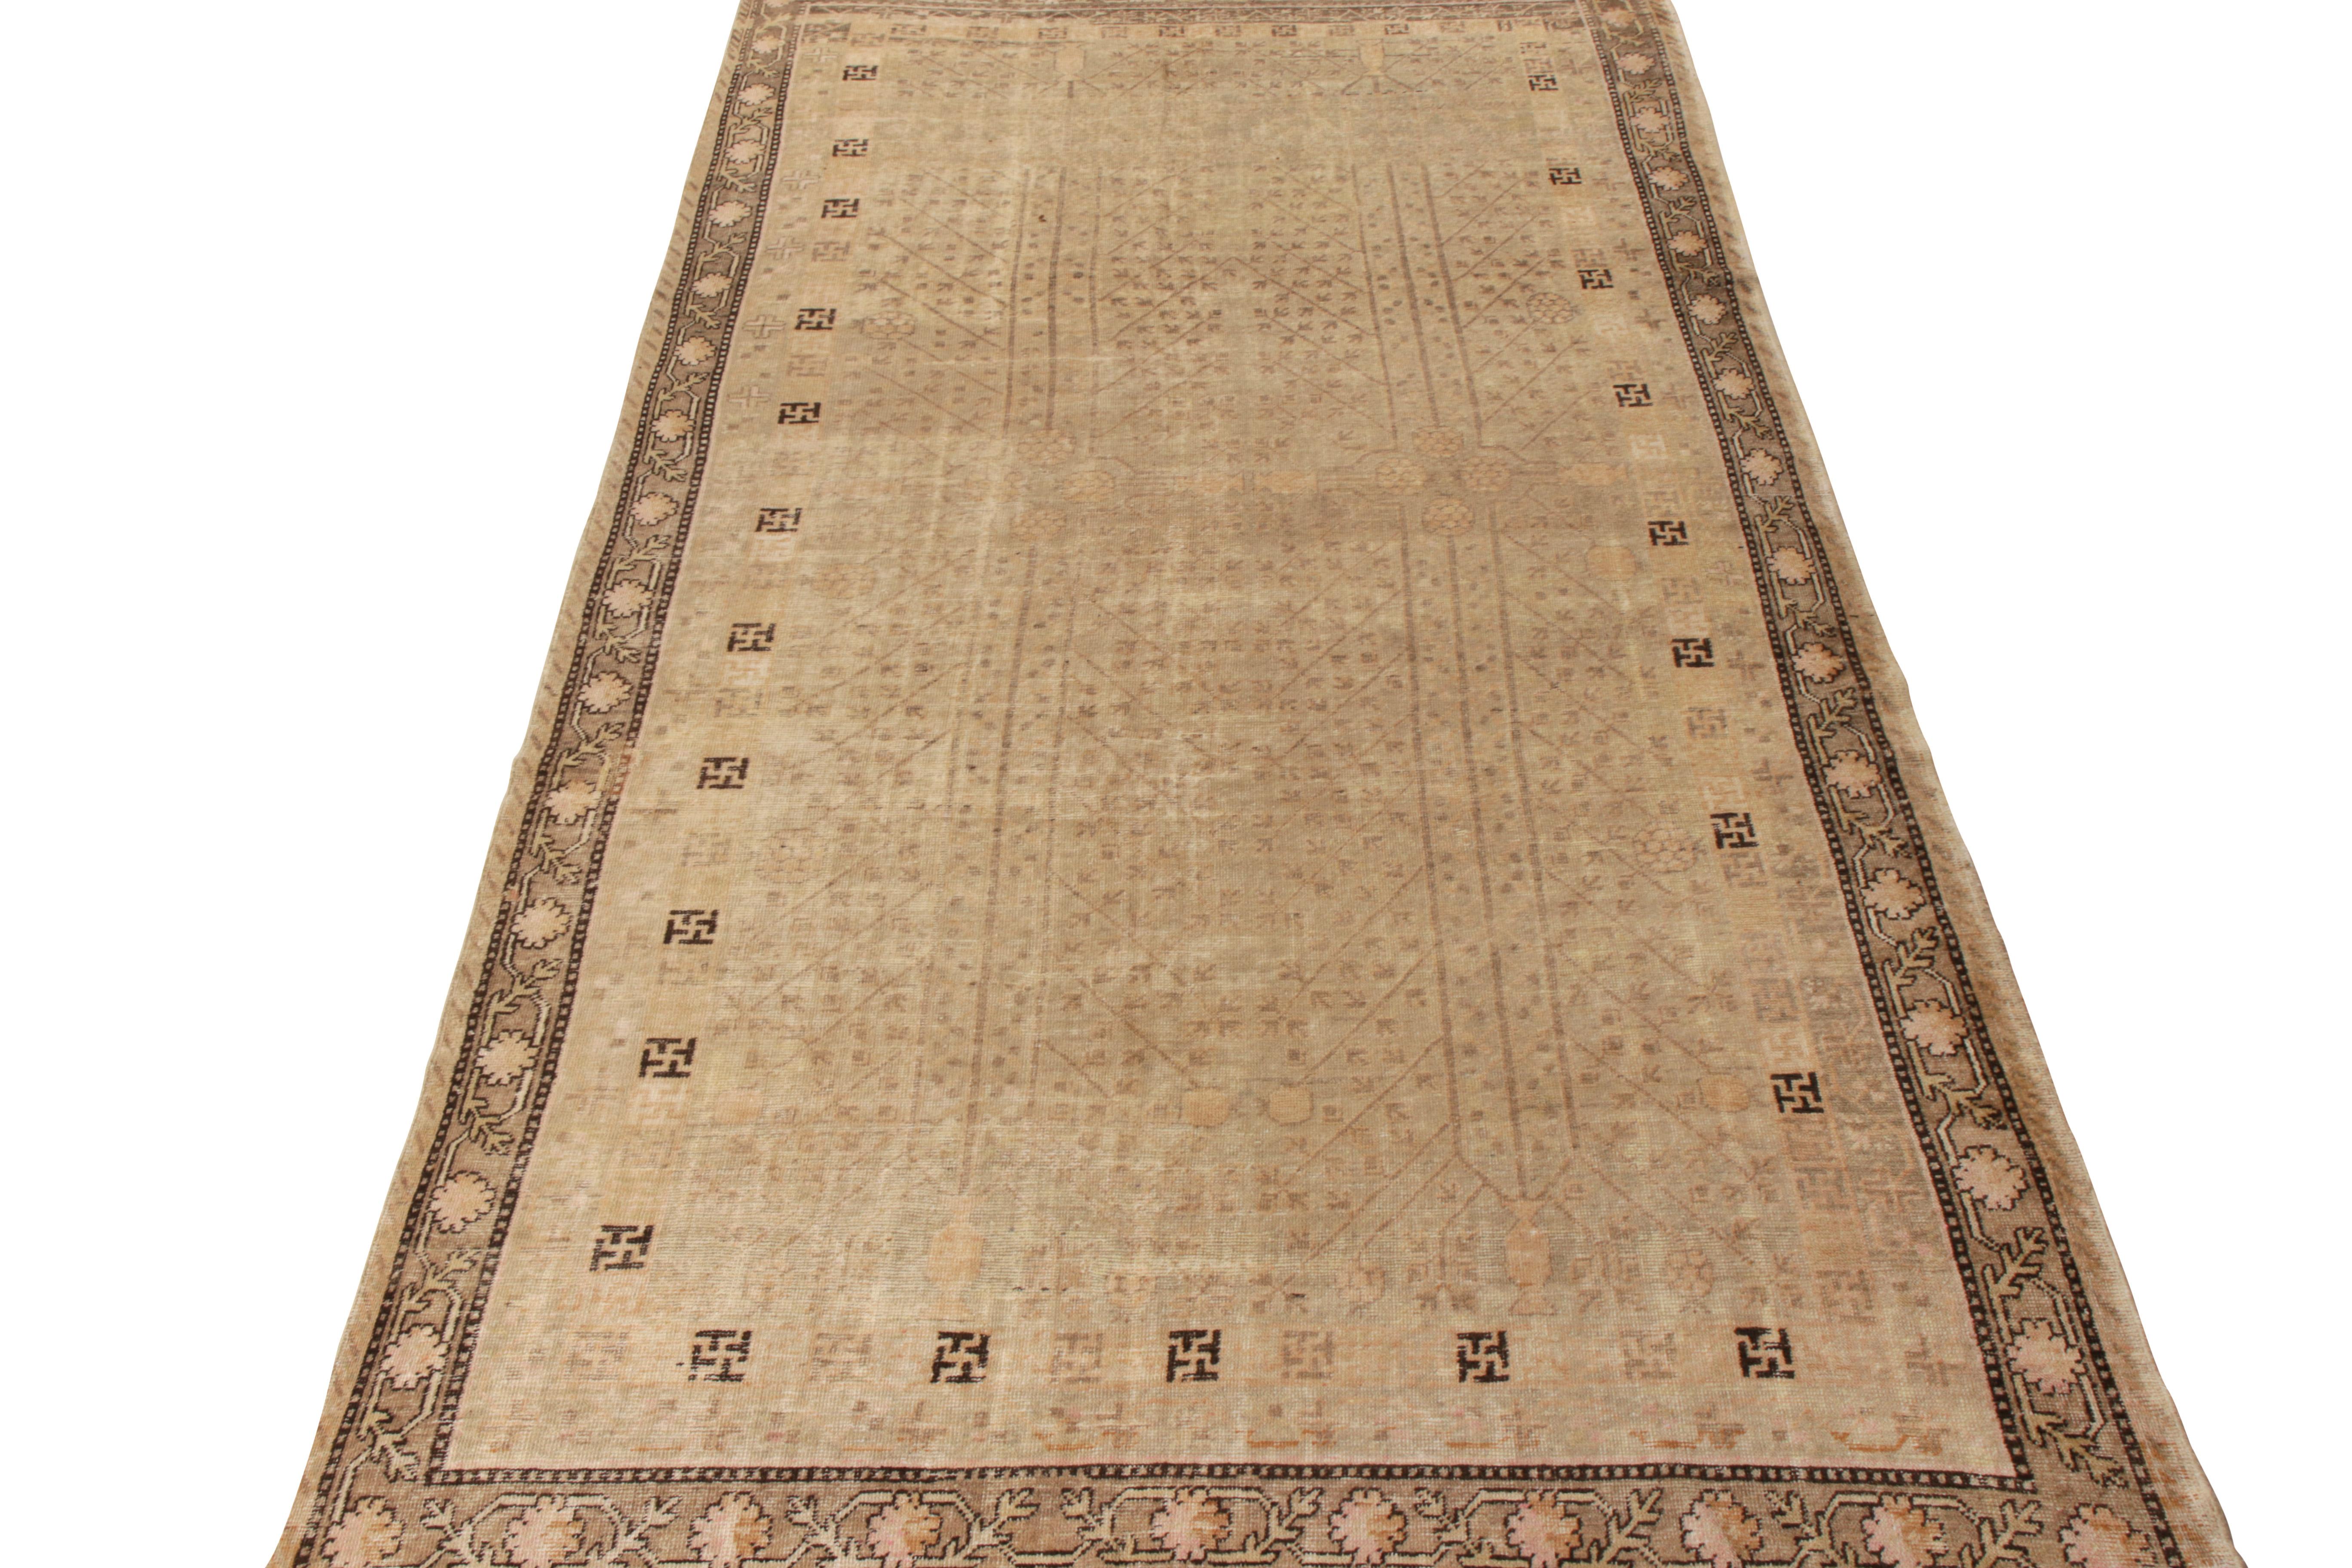 Hand knotted in quality wool, this 6x12 antique Khotan rug originates from Turkestan circa 1920-1930. This muted drawing prevails in delicious tones of beige-brown and golden beautifully complementing the geometric pattern. While the field appears